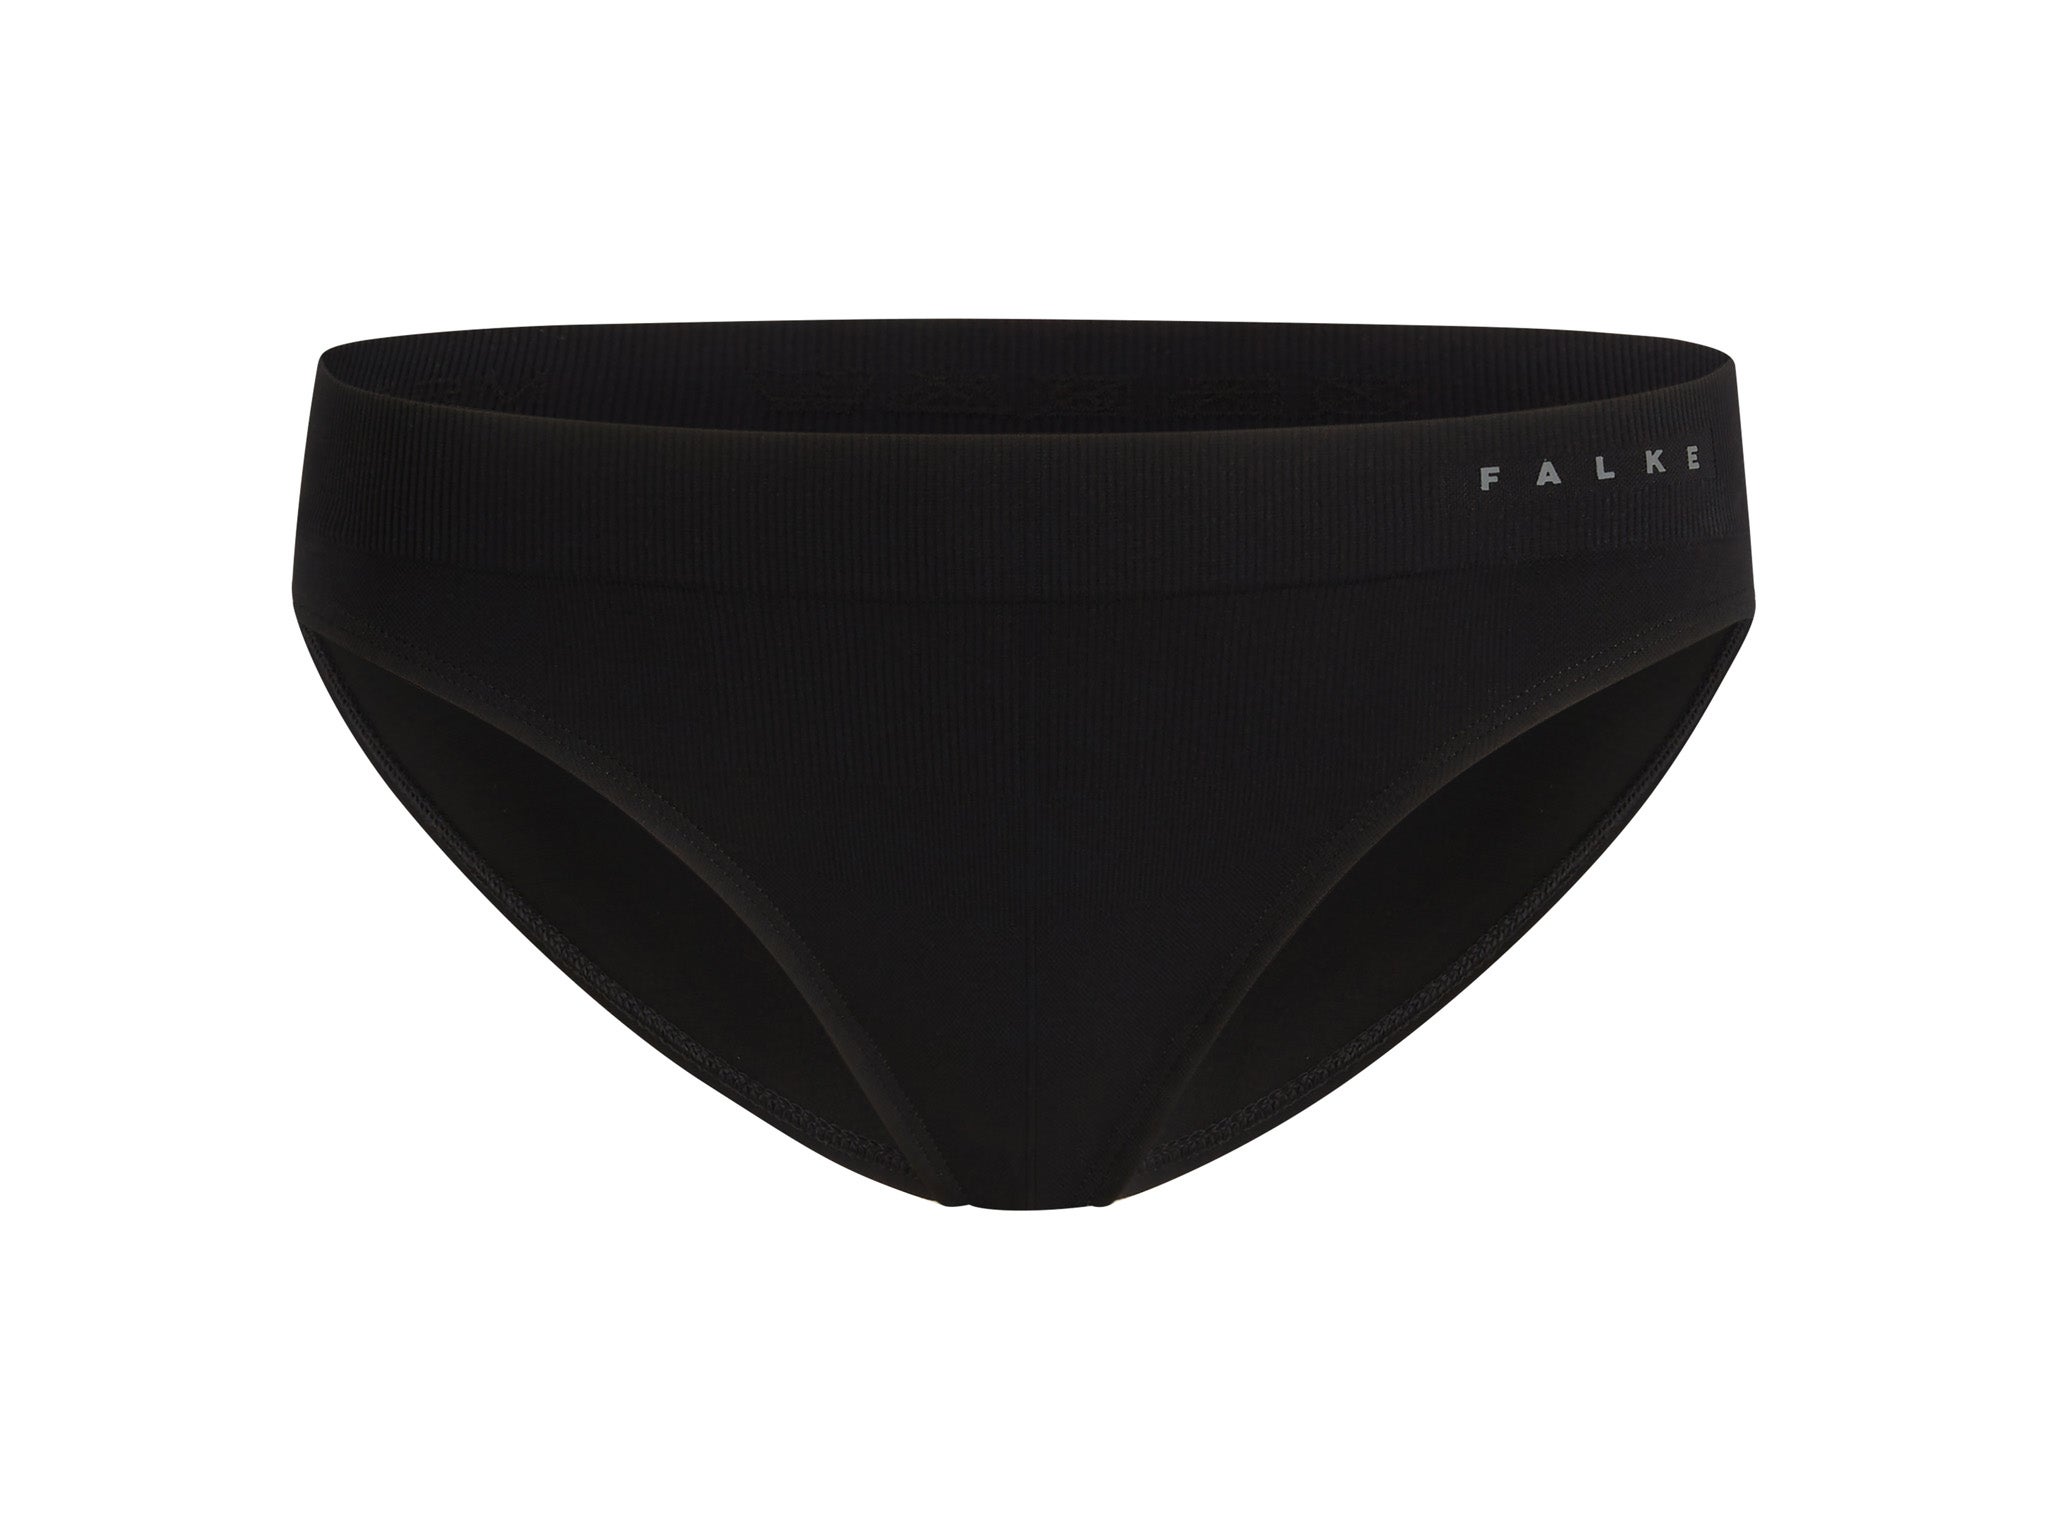 falke-brief-Indybest-review